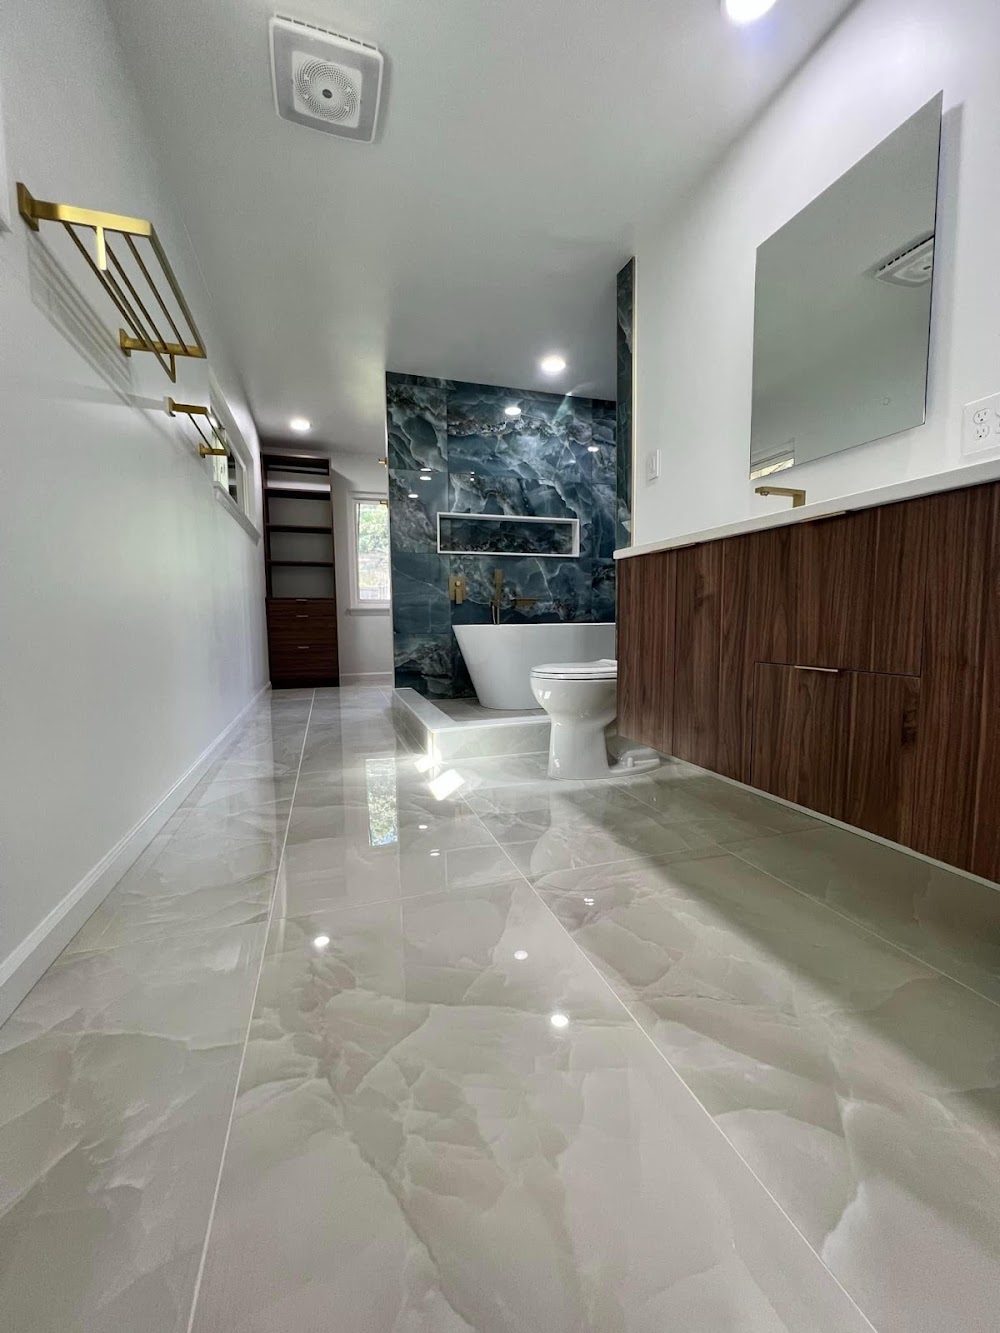 Tile Lux/home remodeling